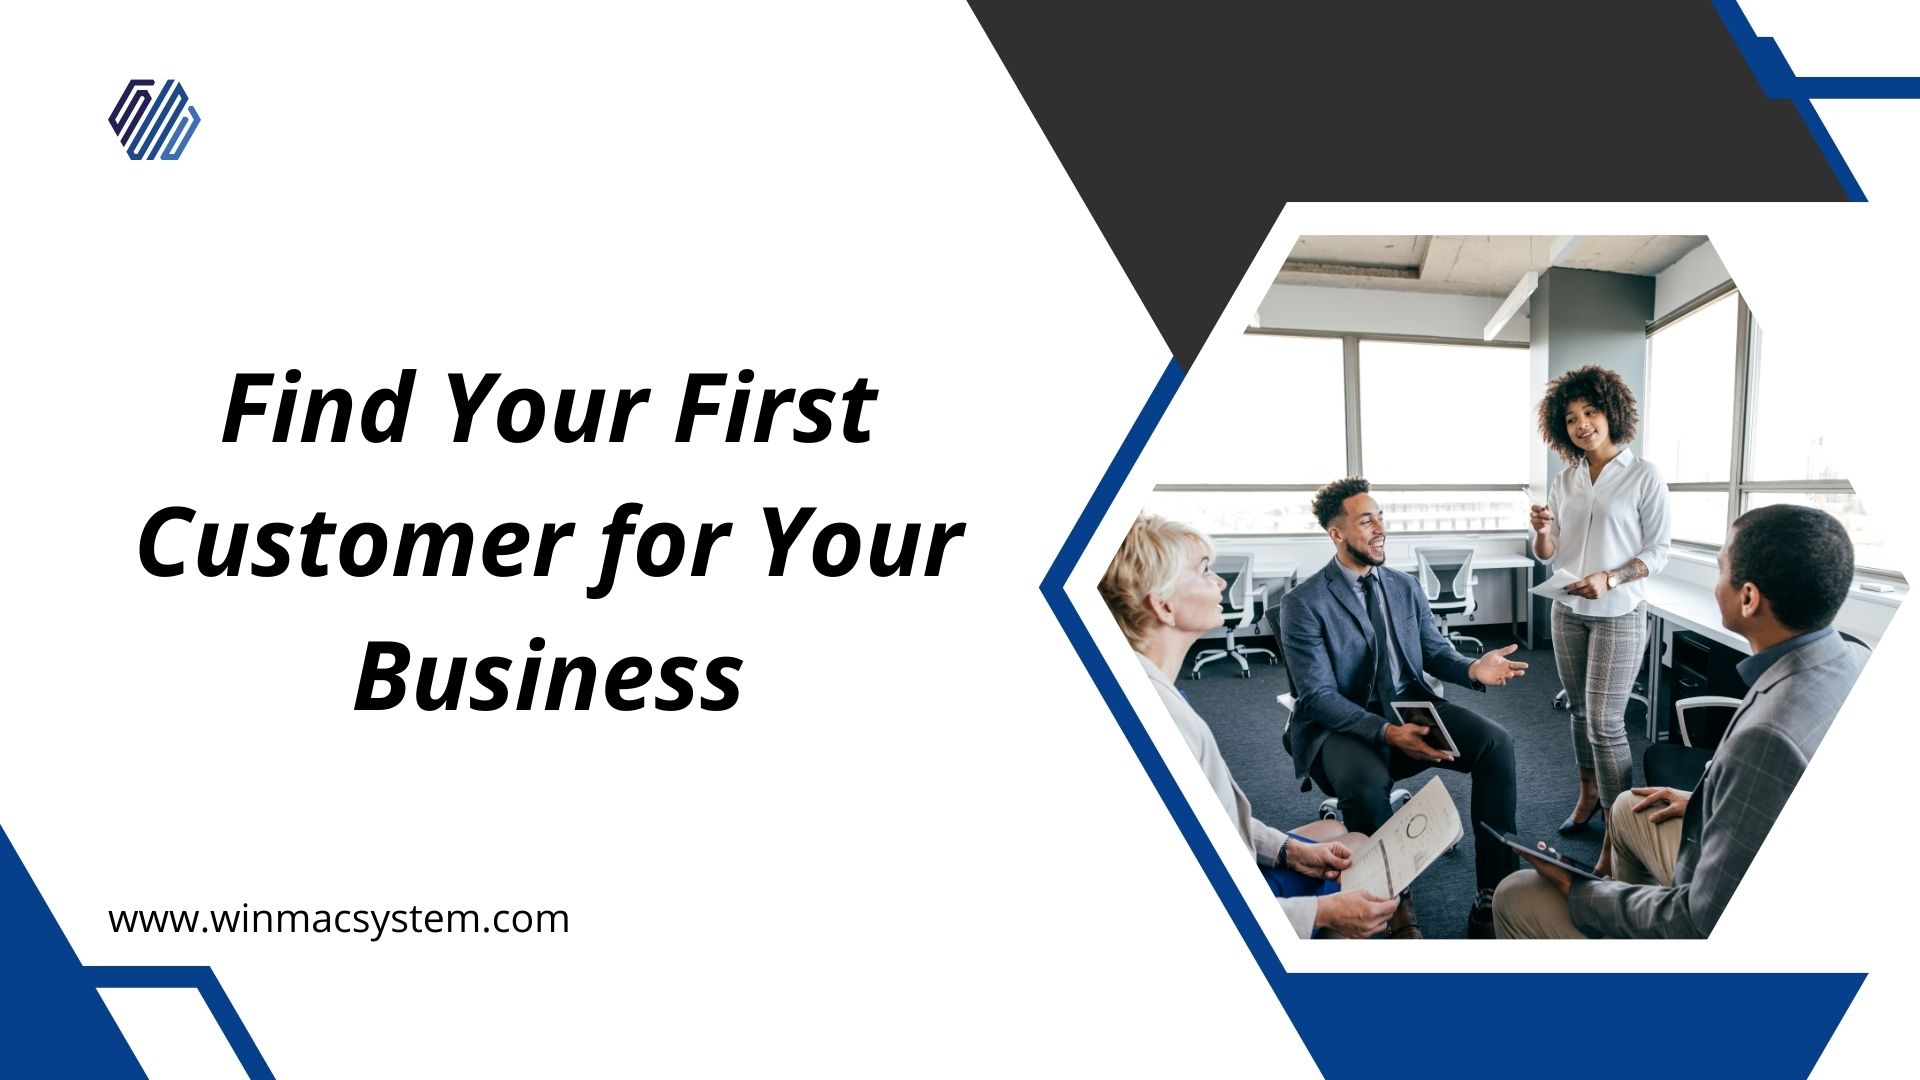 Find Your First Customer for Your Business